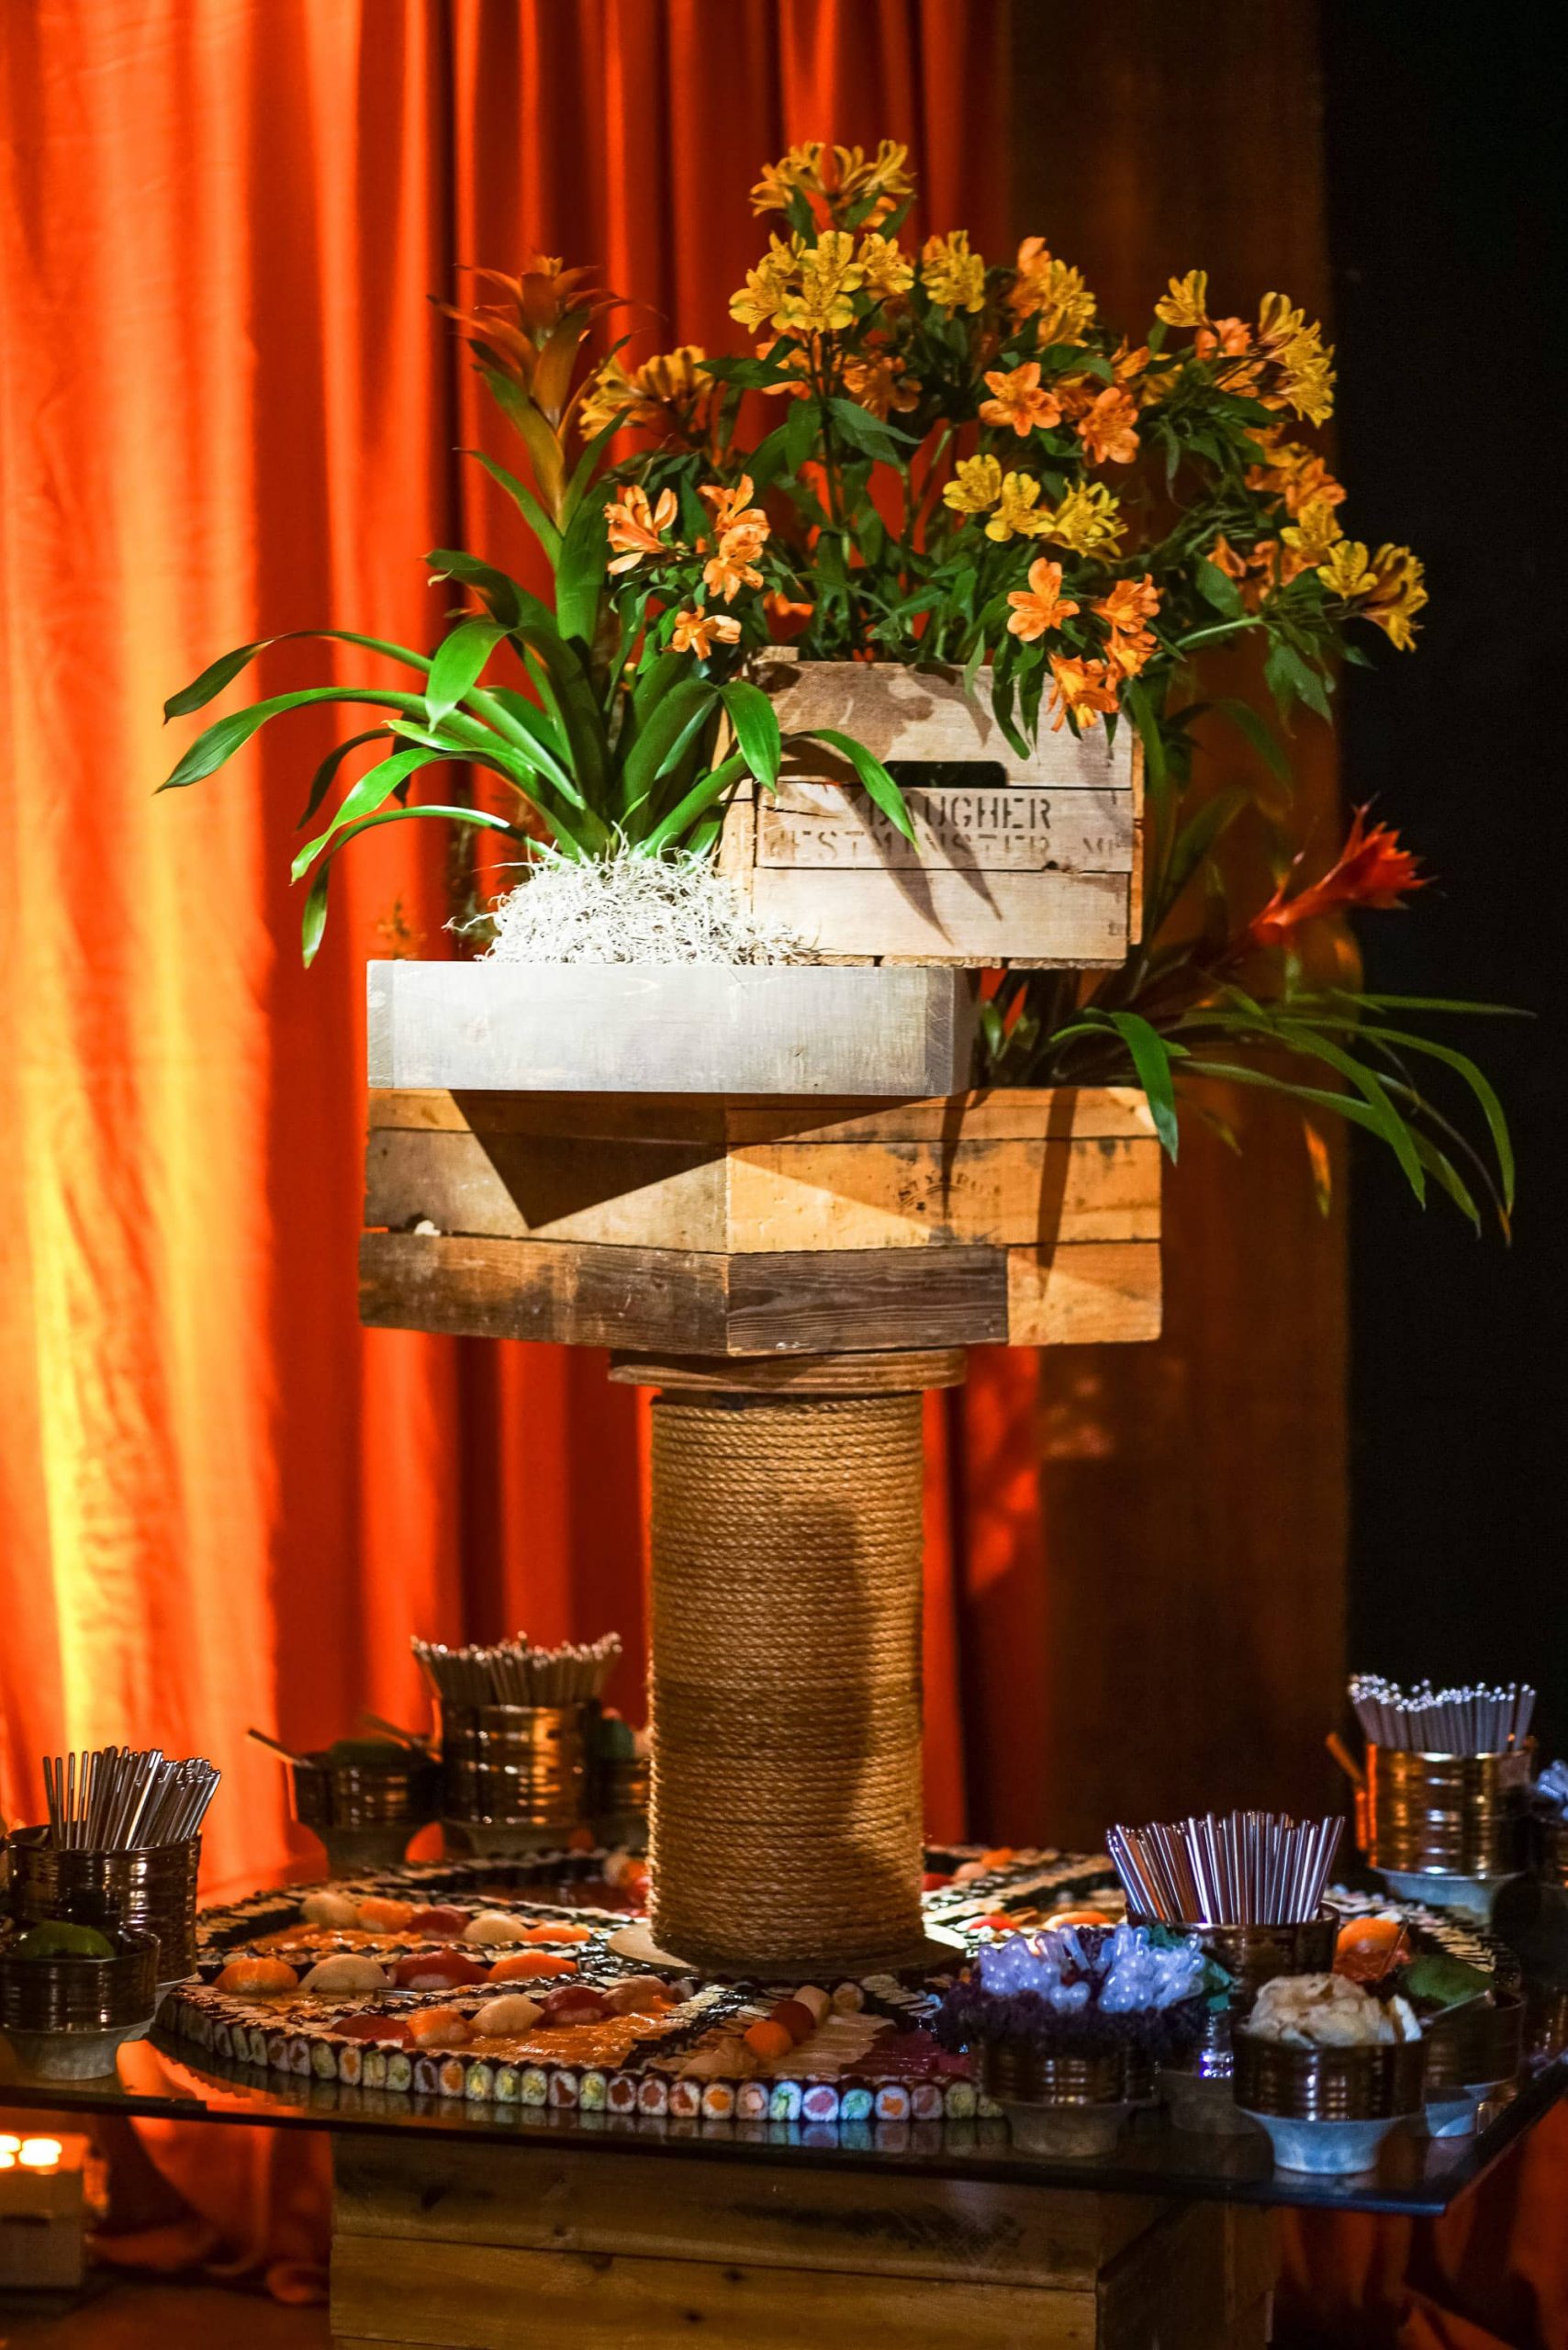 Sushi station at this food festival and souk-inspired bat mitzvah in DC | Photo by Luis Zepeda